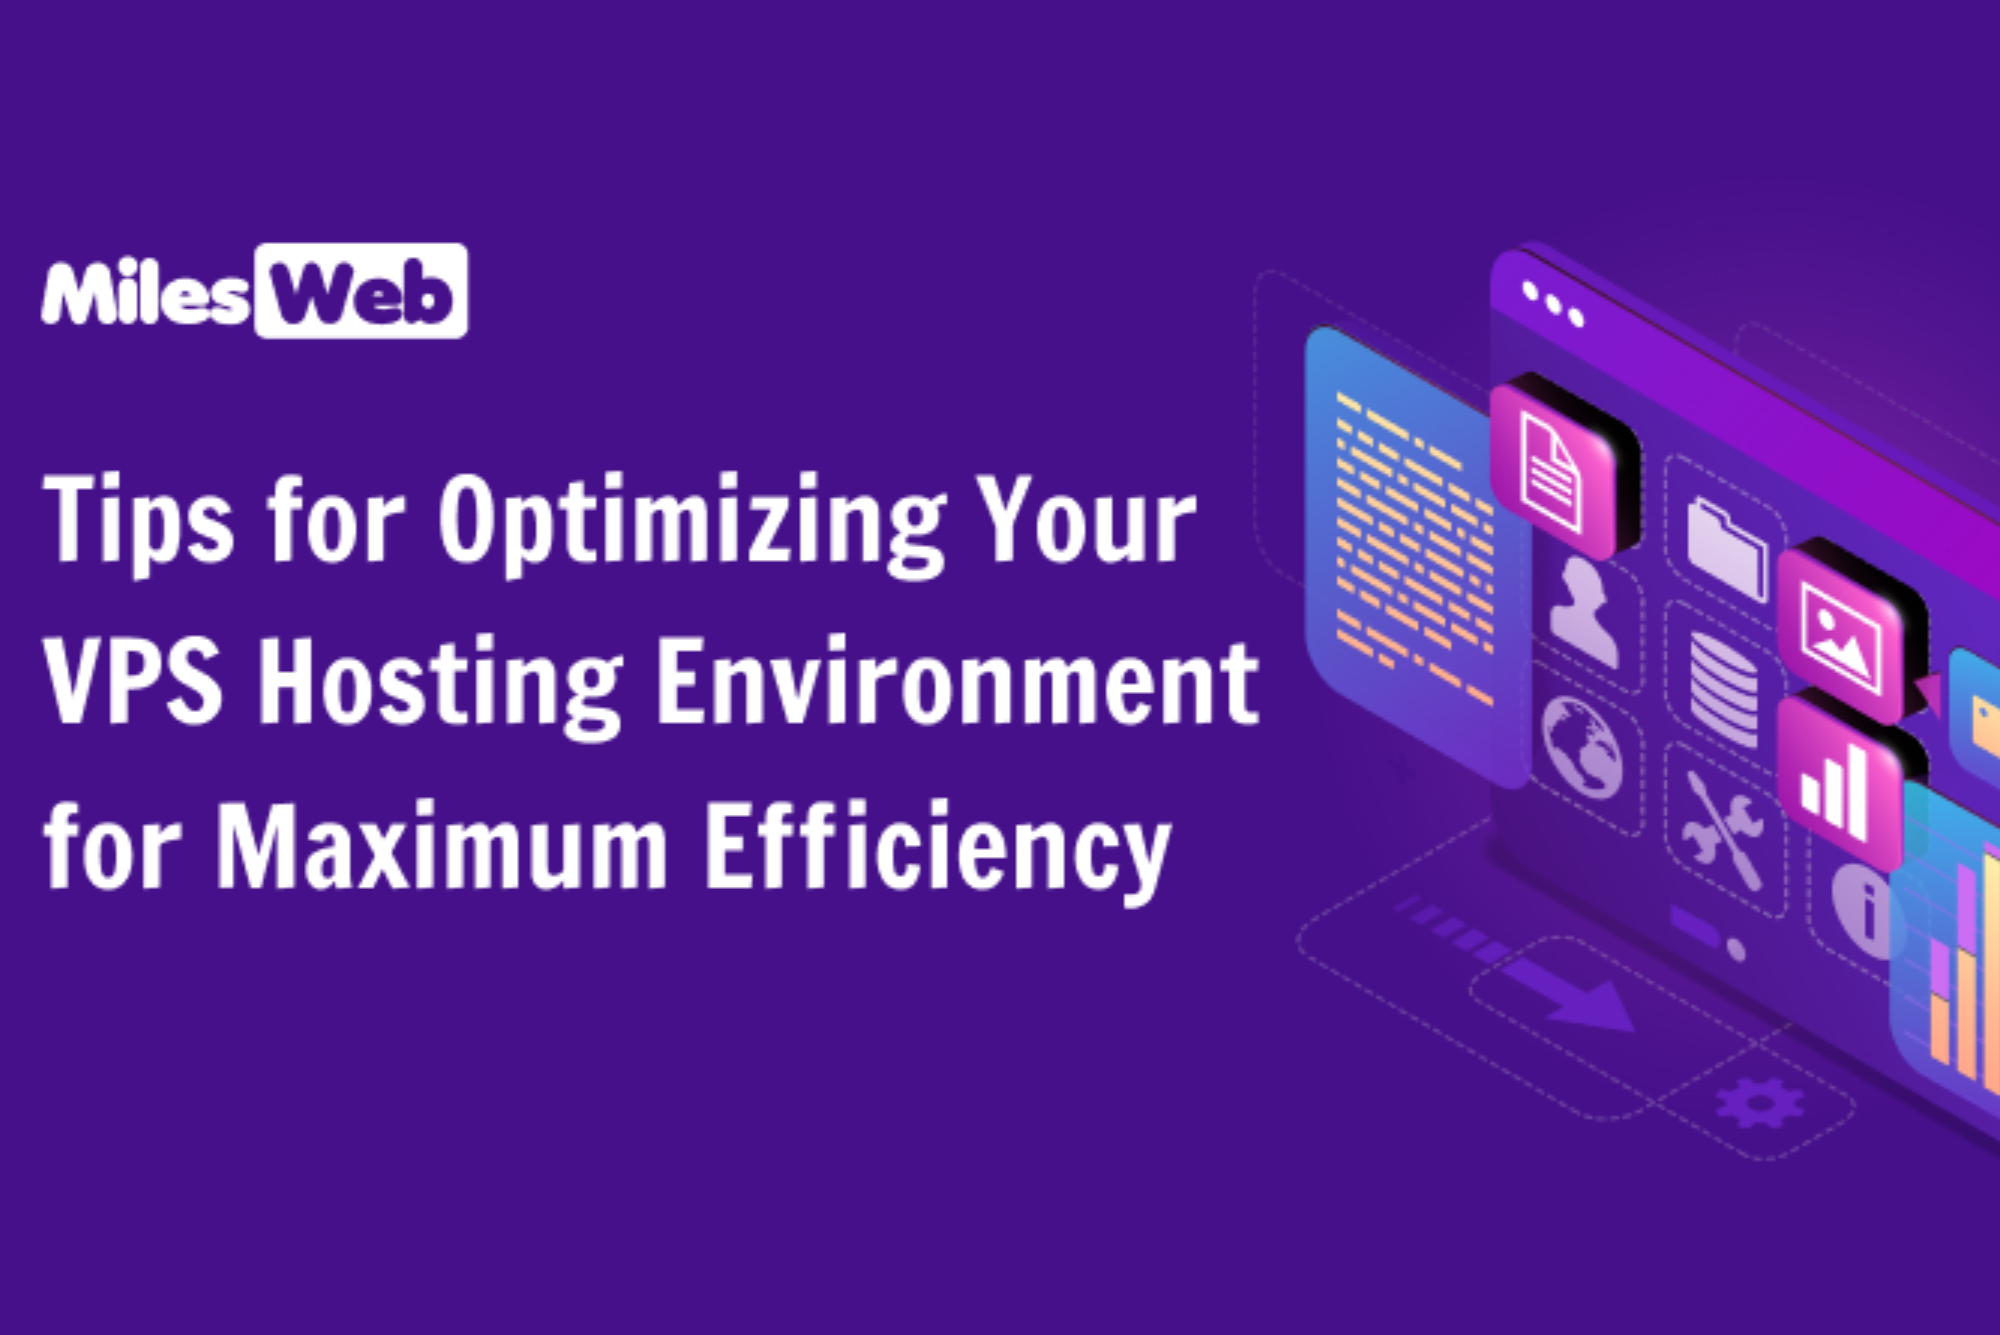 Tips for Optimizing Your VPS Hosting Environment for Maximum Efficiency